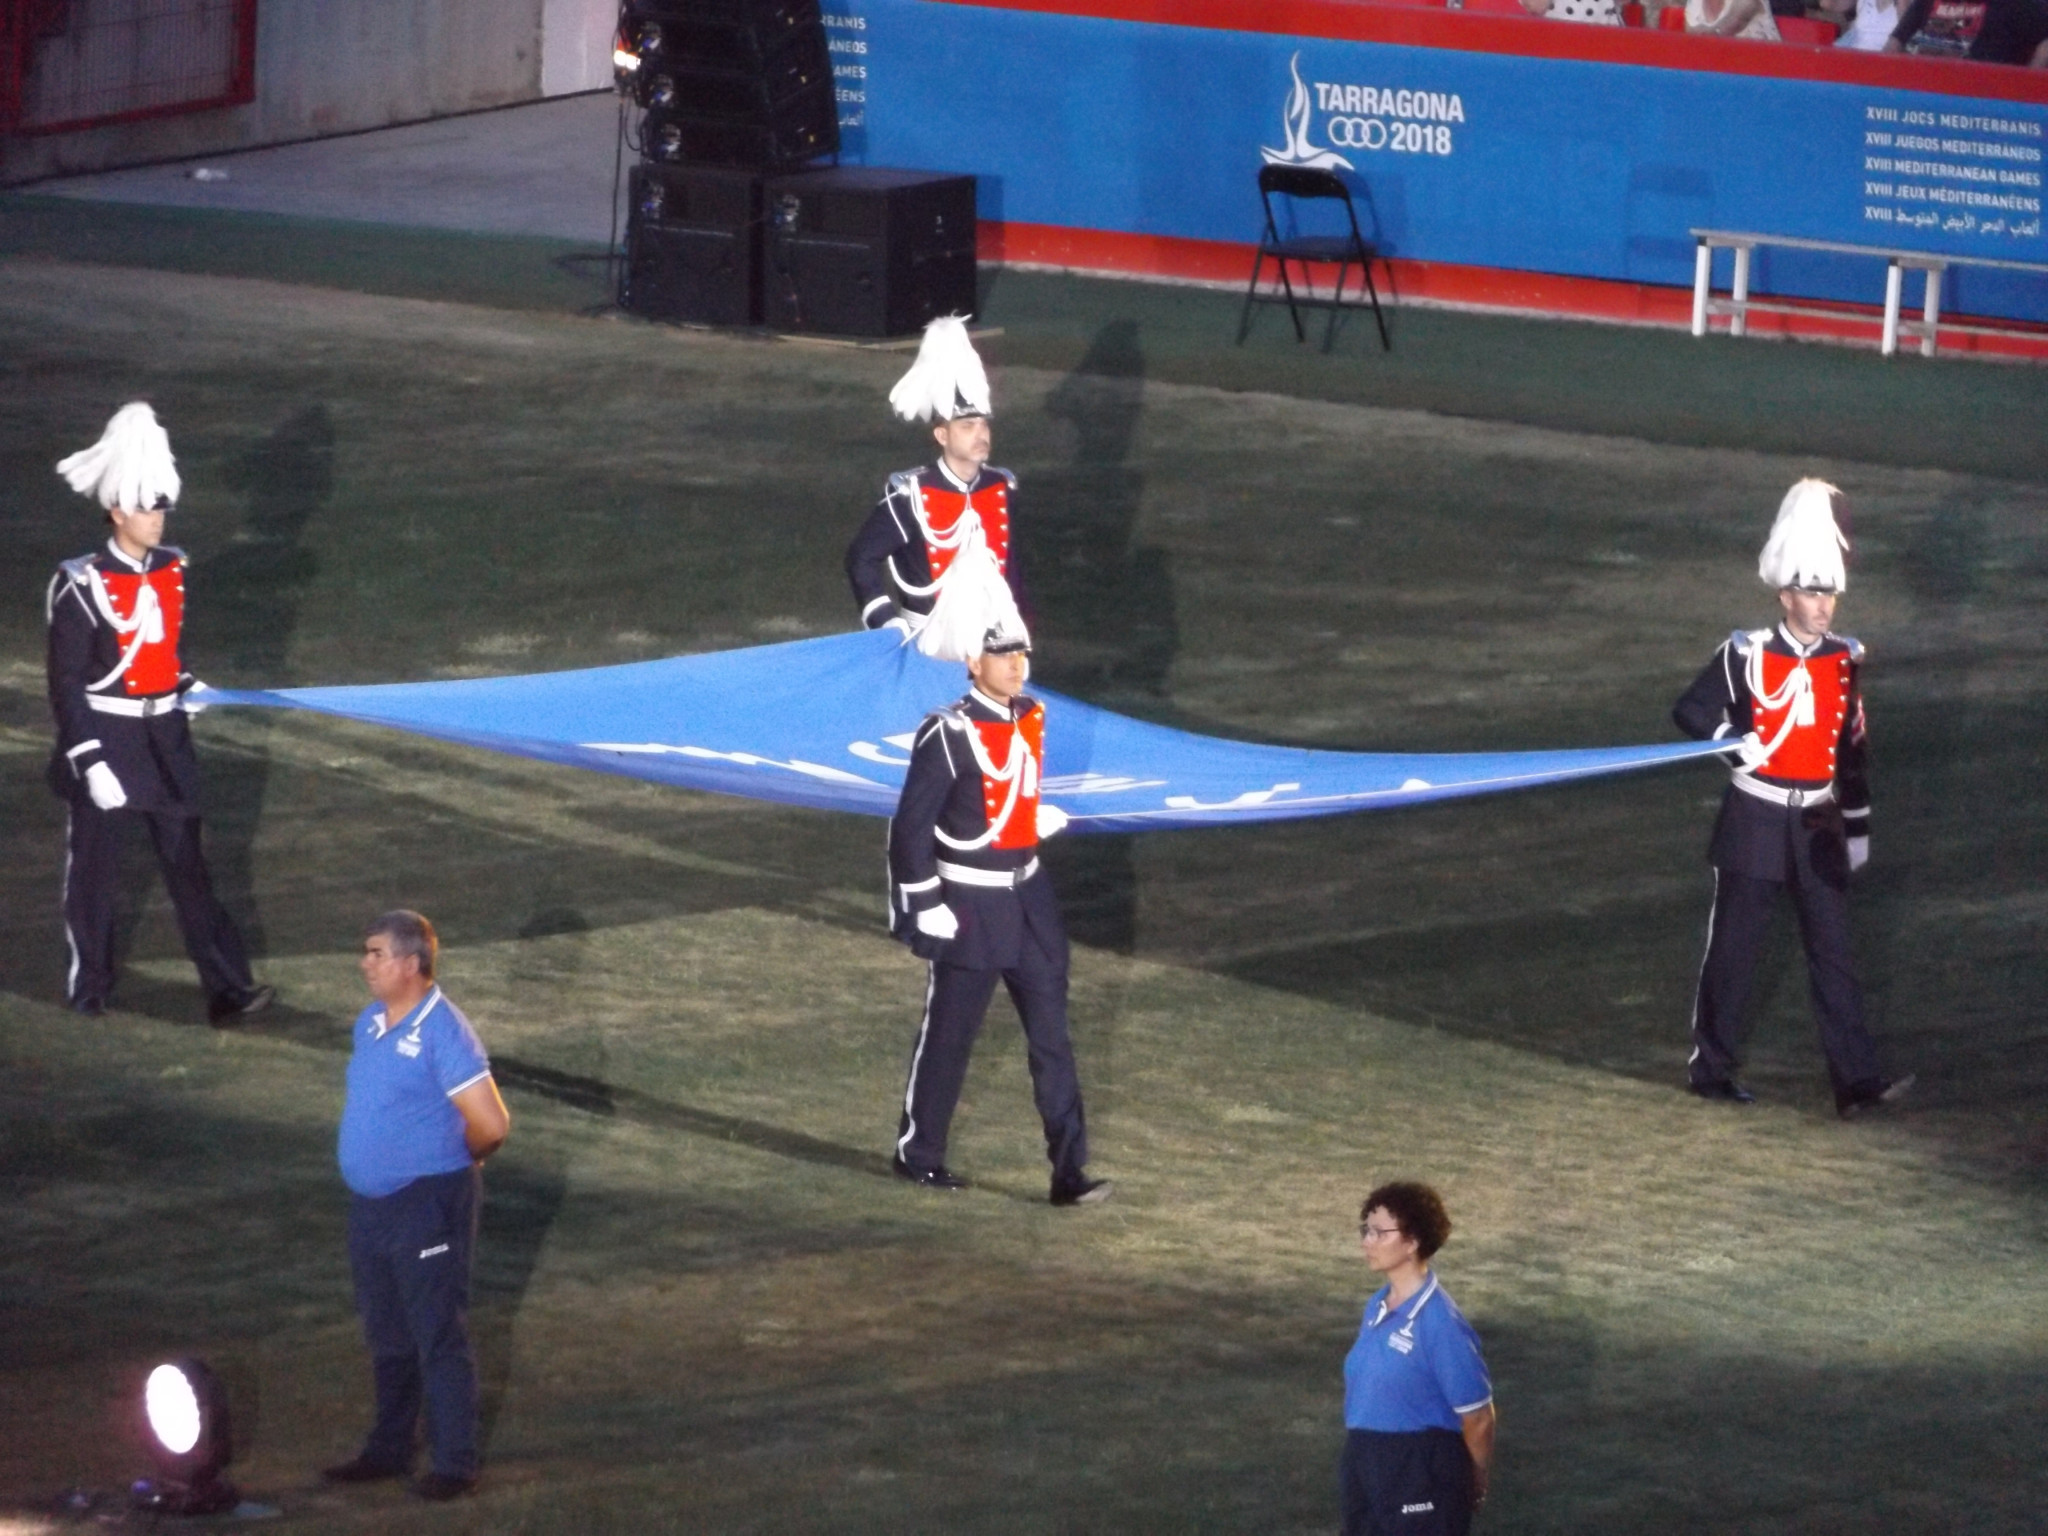 The Guardia Urbana de Gala carried the flag while music specially composed for Tarragona 2018 was played ©ITG